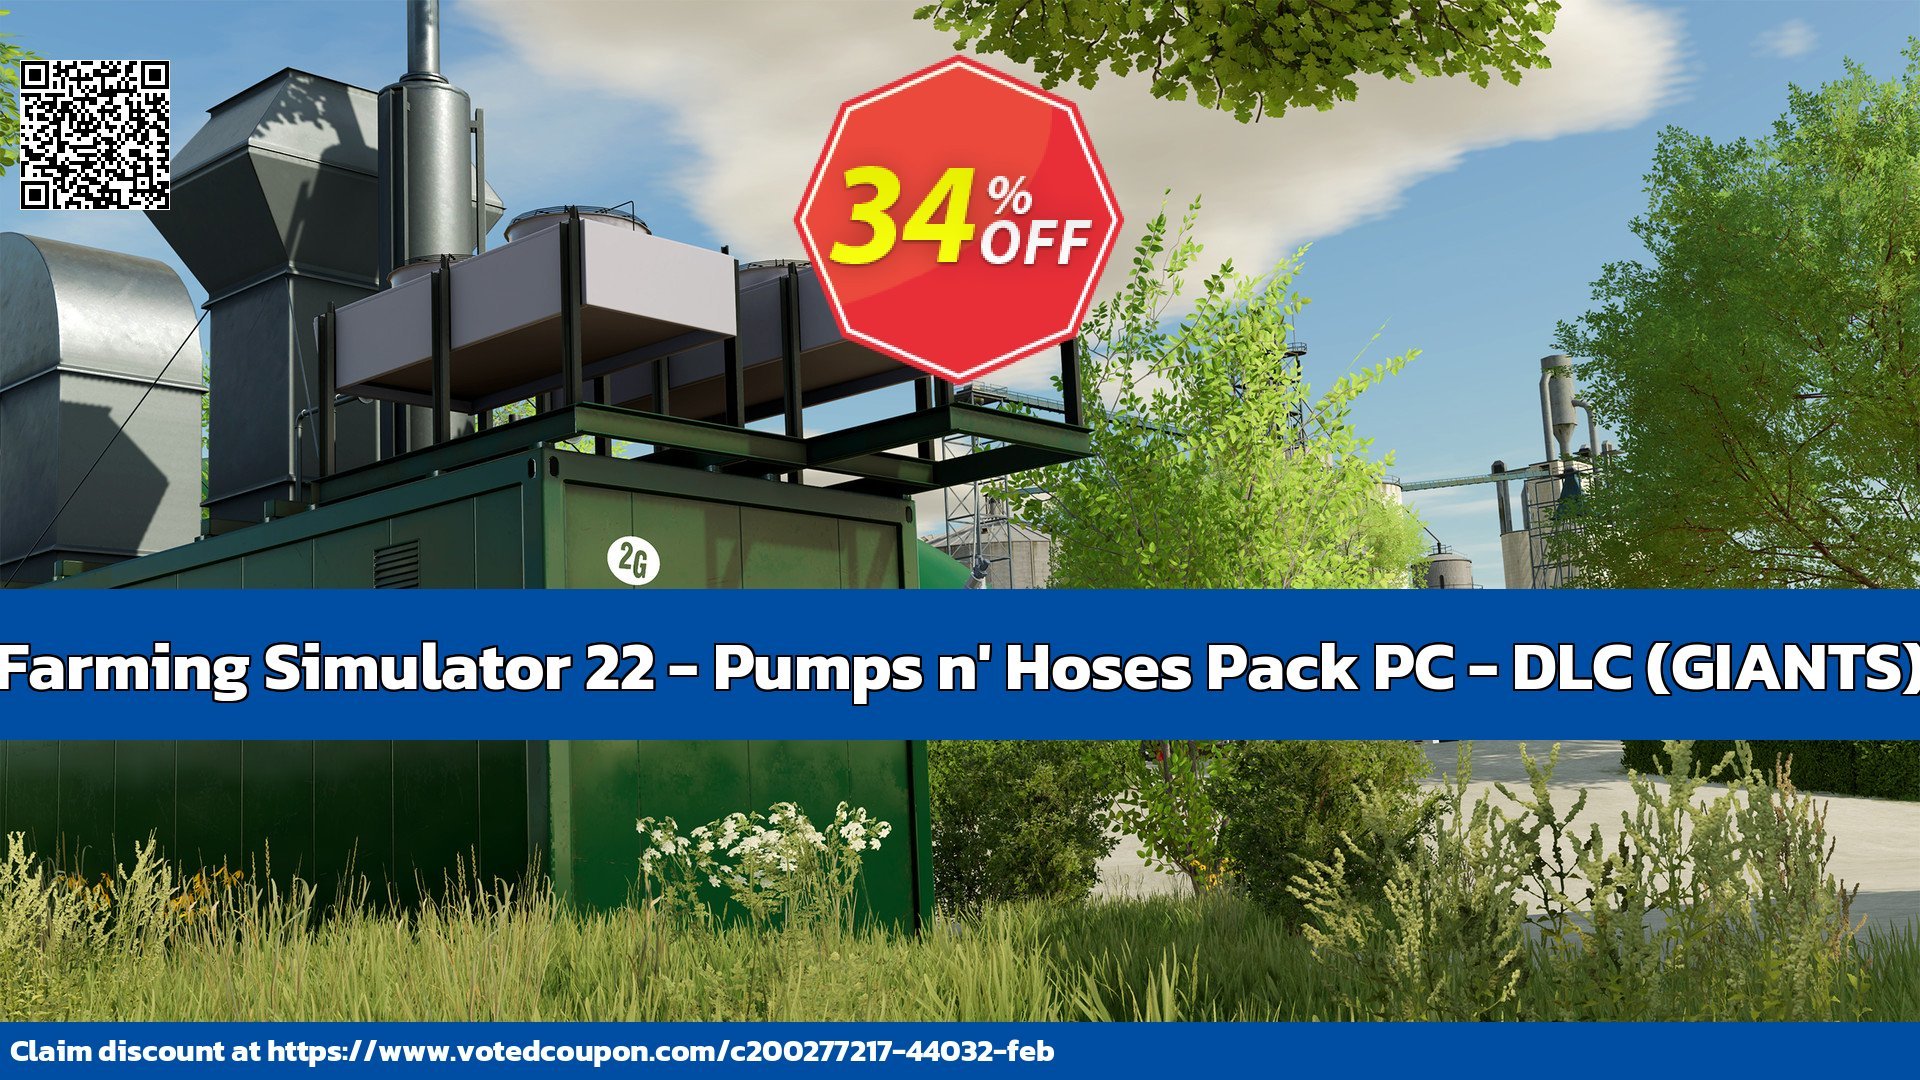 Farming Simulator 22 - Pumps n' Hoses Pack PC - DLC, GIANTS  Coupon Code May 2024, 35% OFF - VotedCoupon